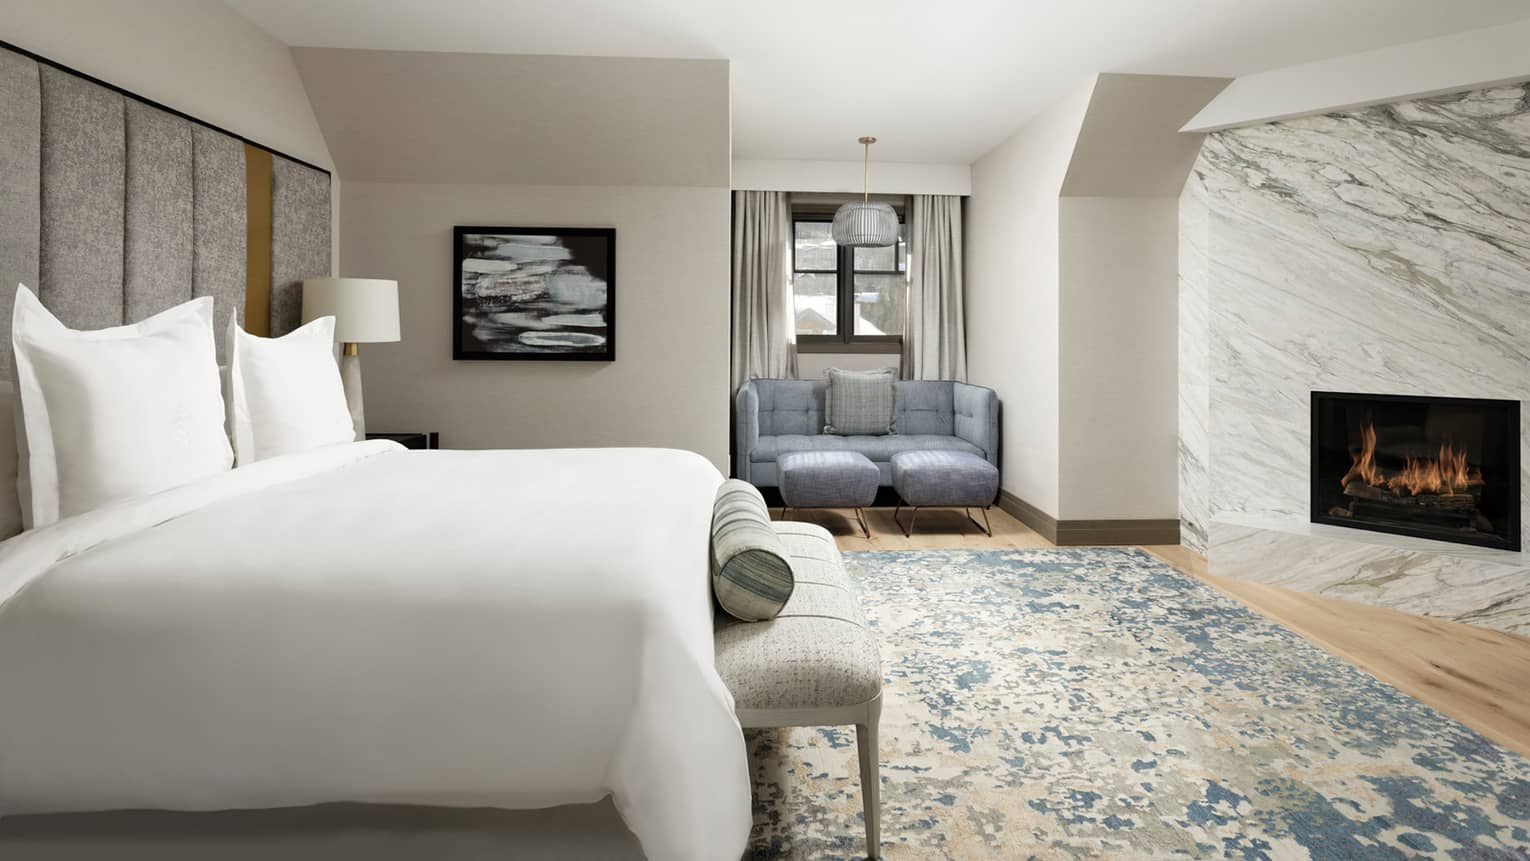 Hotel room bed, small bench and area rug across from marble wall with modern fireplace